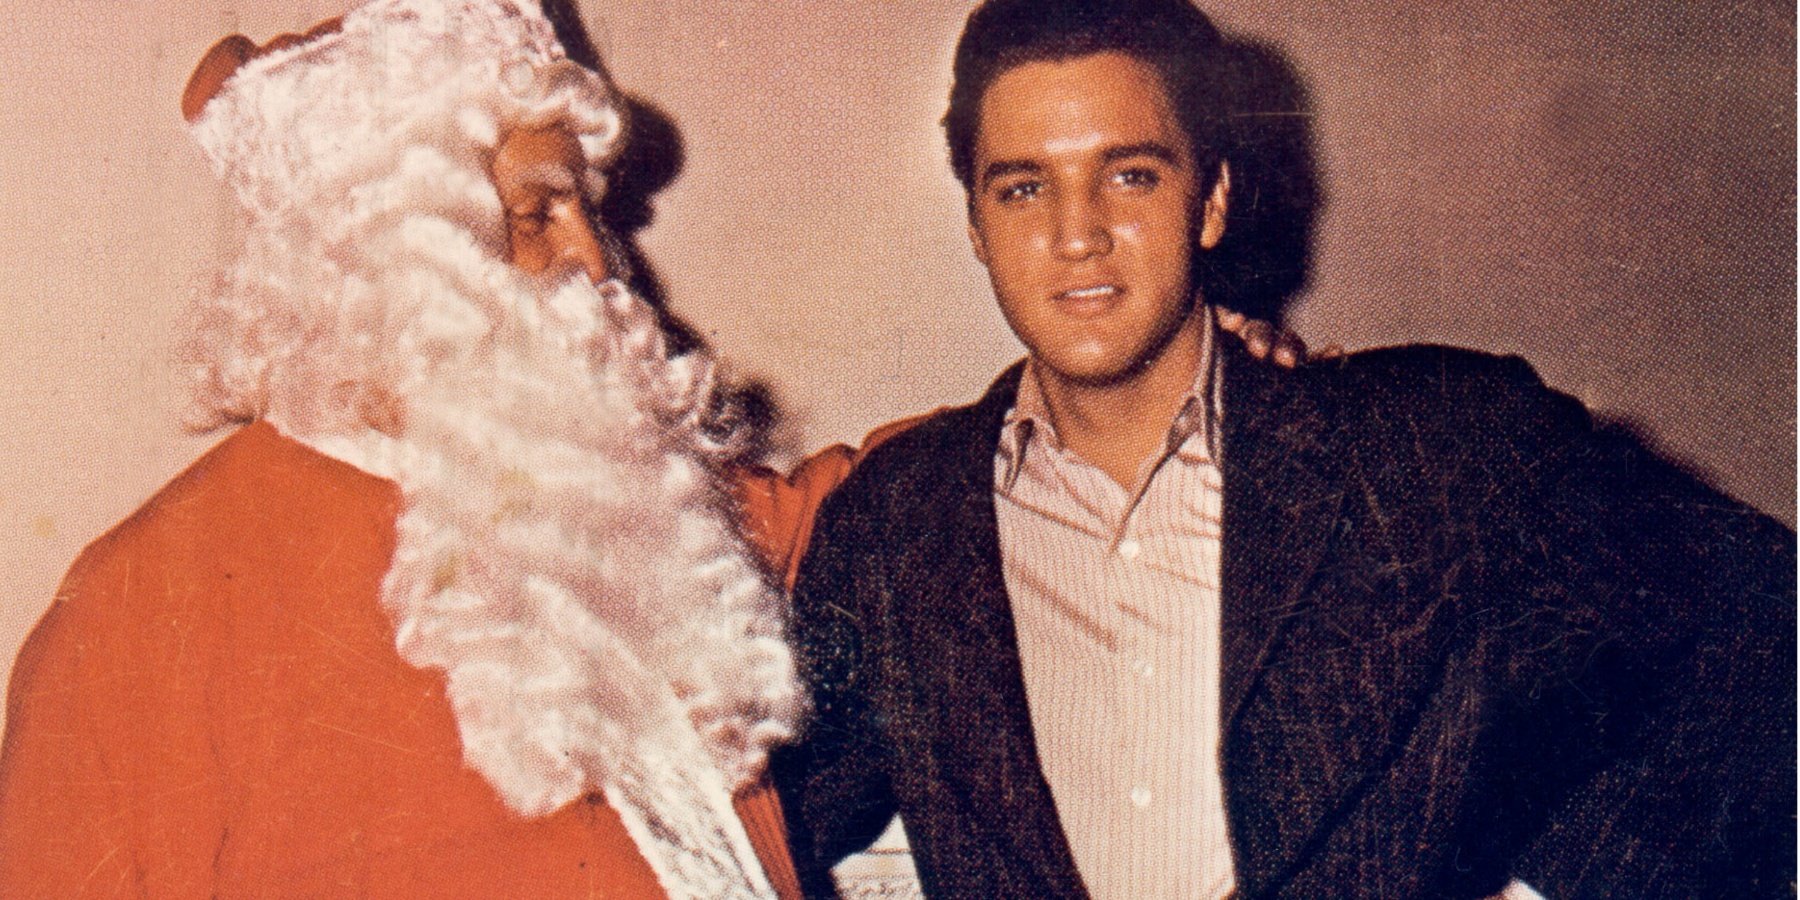 Elvis Presley poses with Colonel Tom Parker, dresses as Santa Claus, during Christmas.